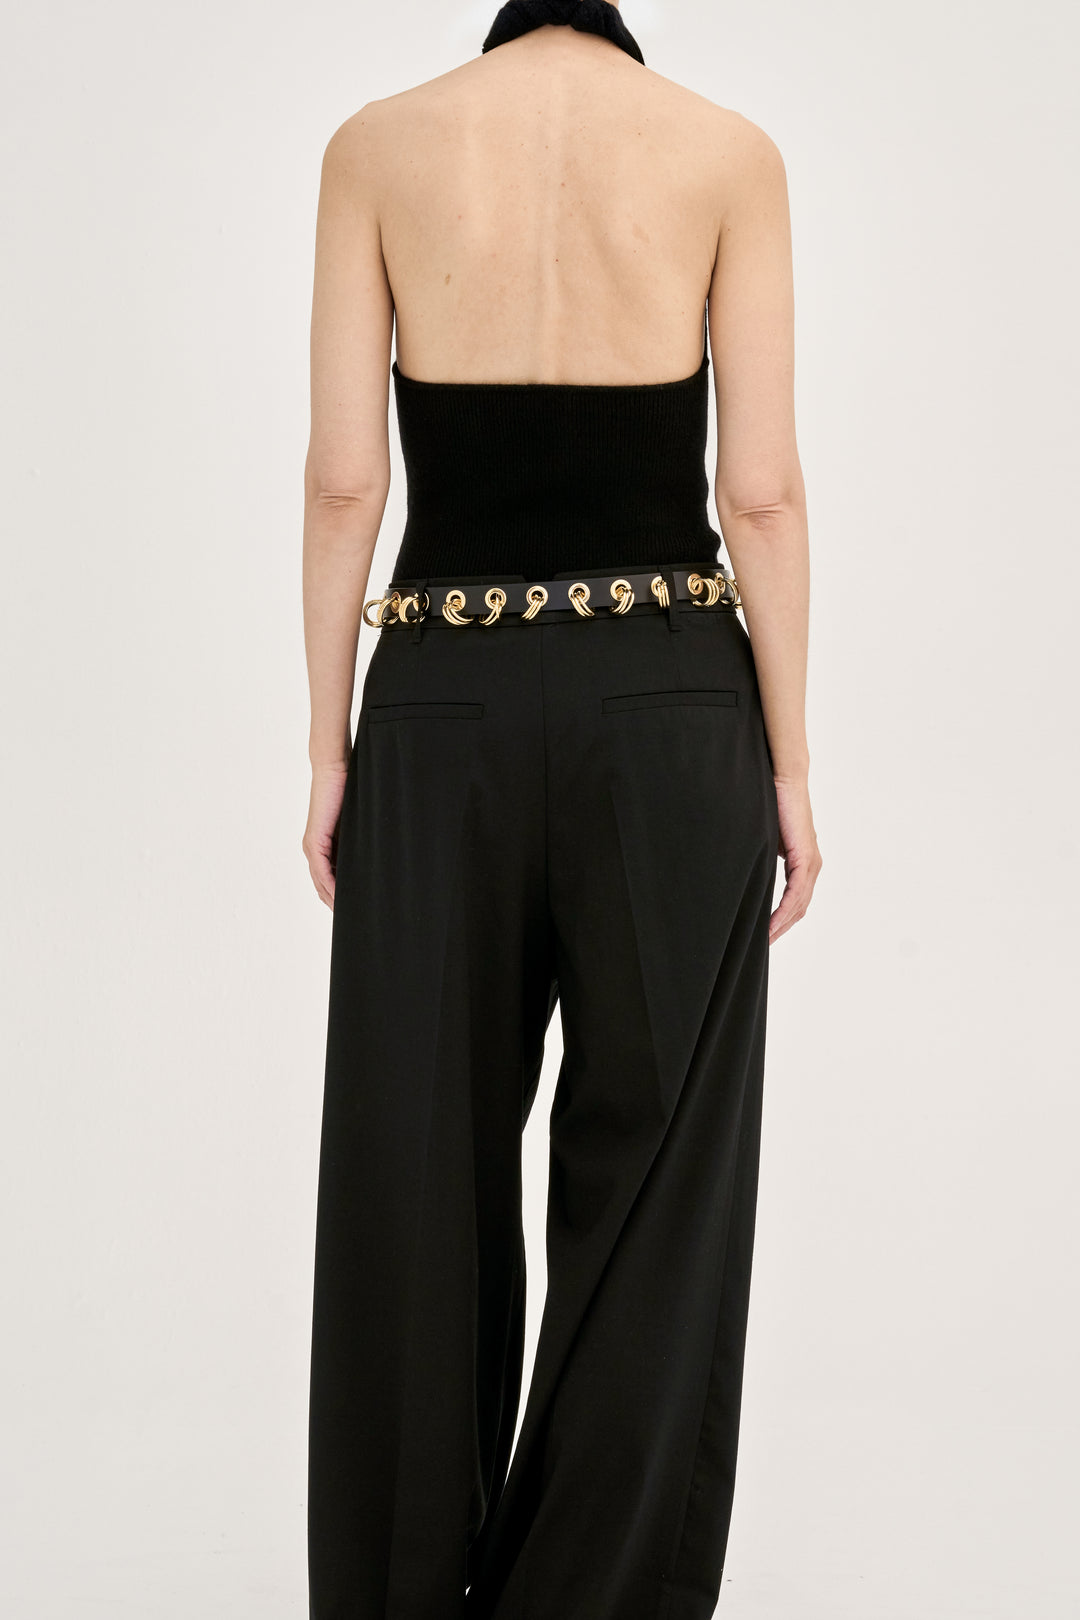 Model wearing Déhanche Revenge Gold black leather belt with gold grommets and buckle, styled with black trousers and a strapless black top, back view